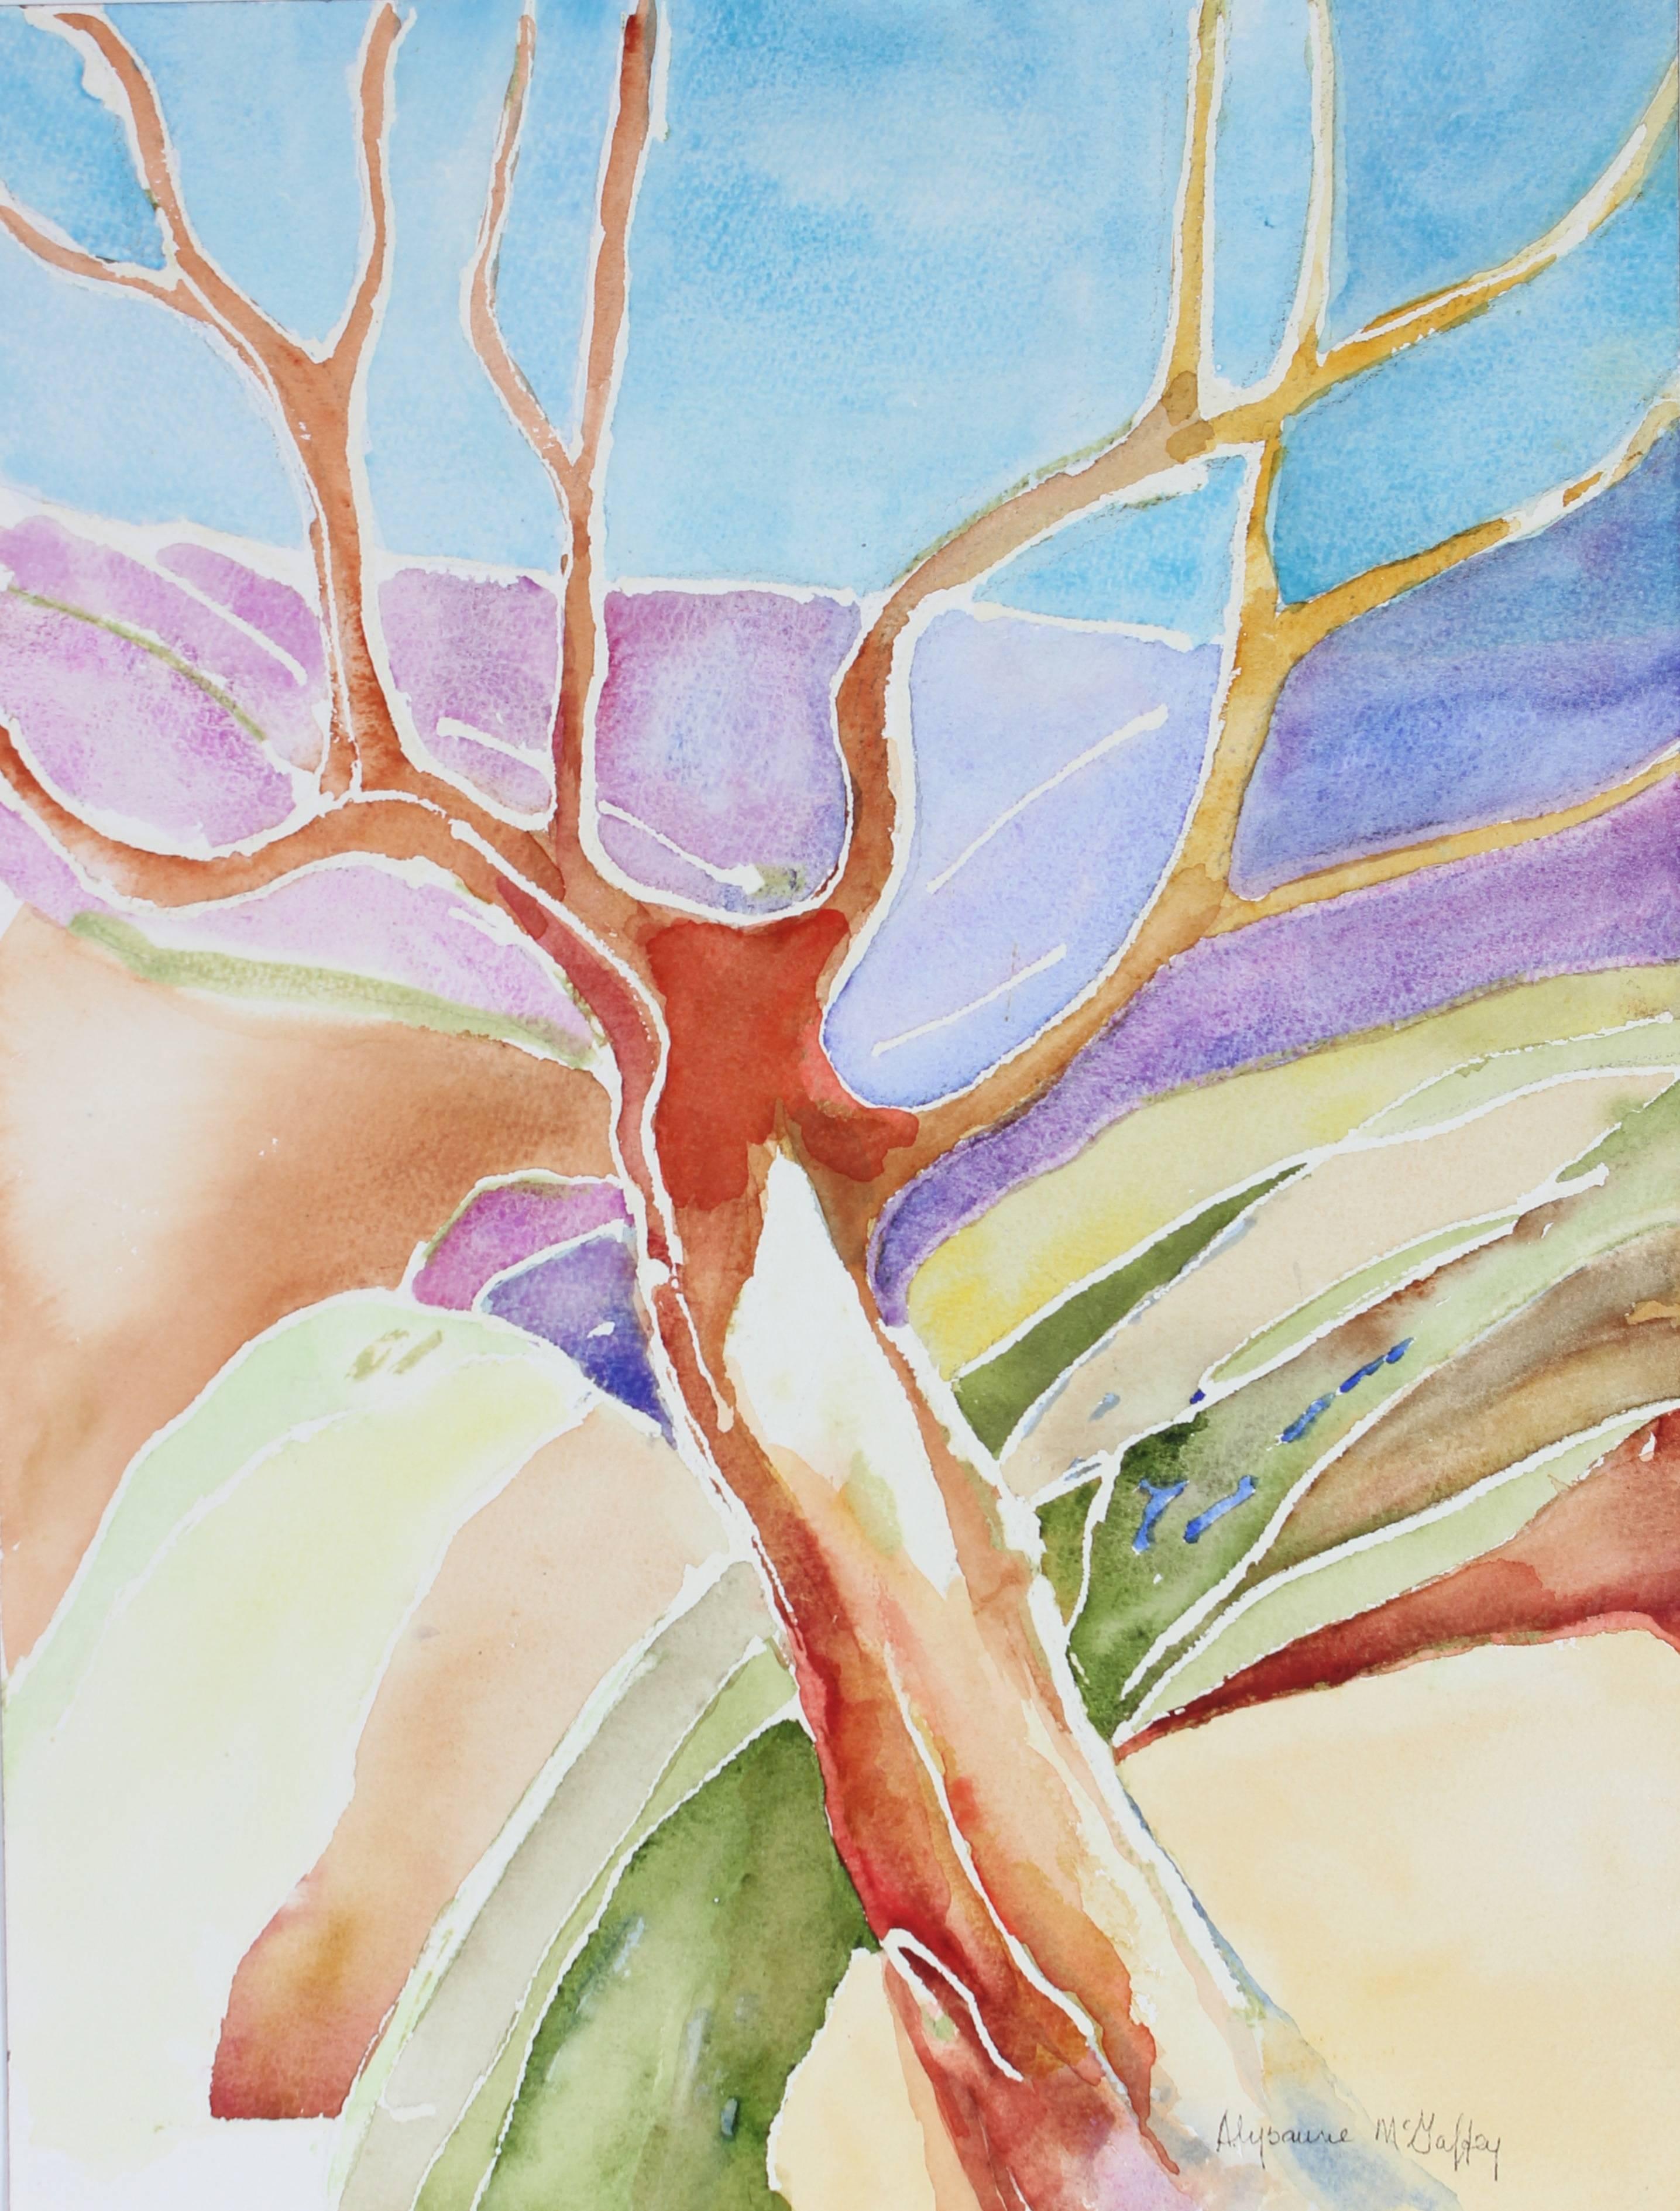 Colorful Tree in a Landscape, Watercolor Painting, Late 20th Century - American Modern Art by Alysanne McGaffey